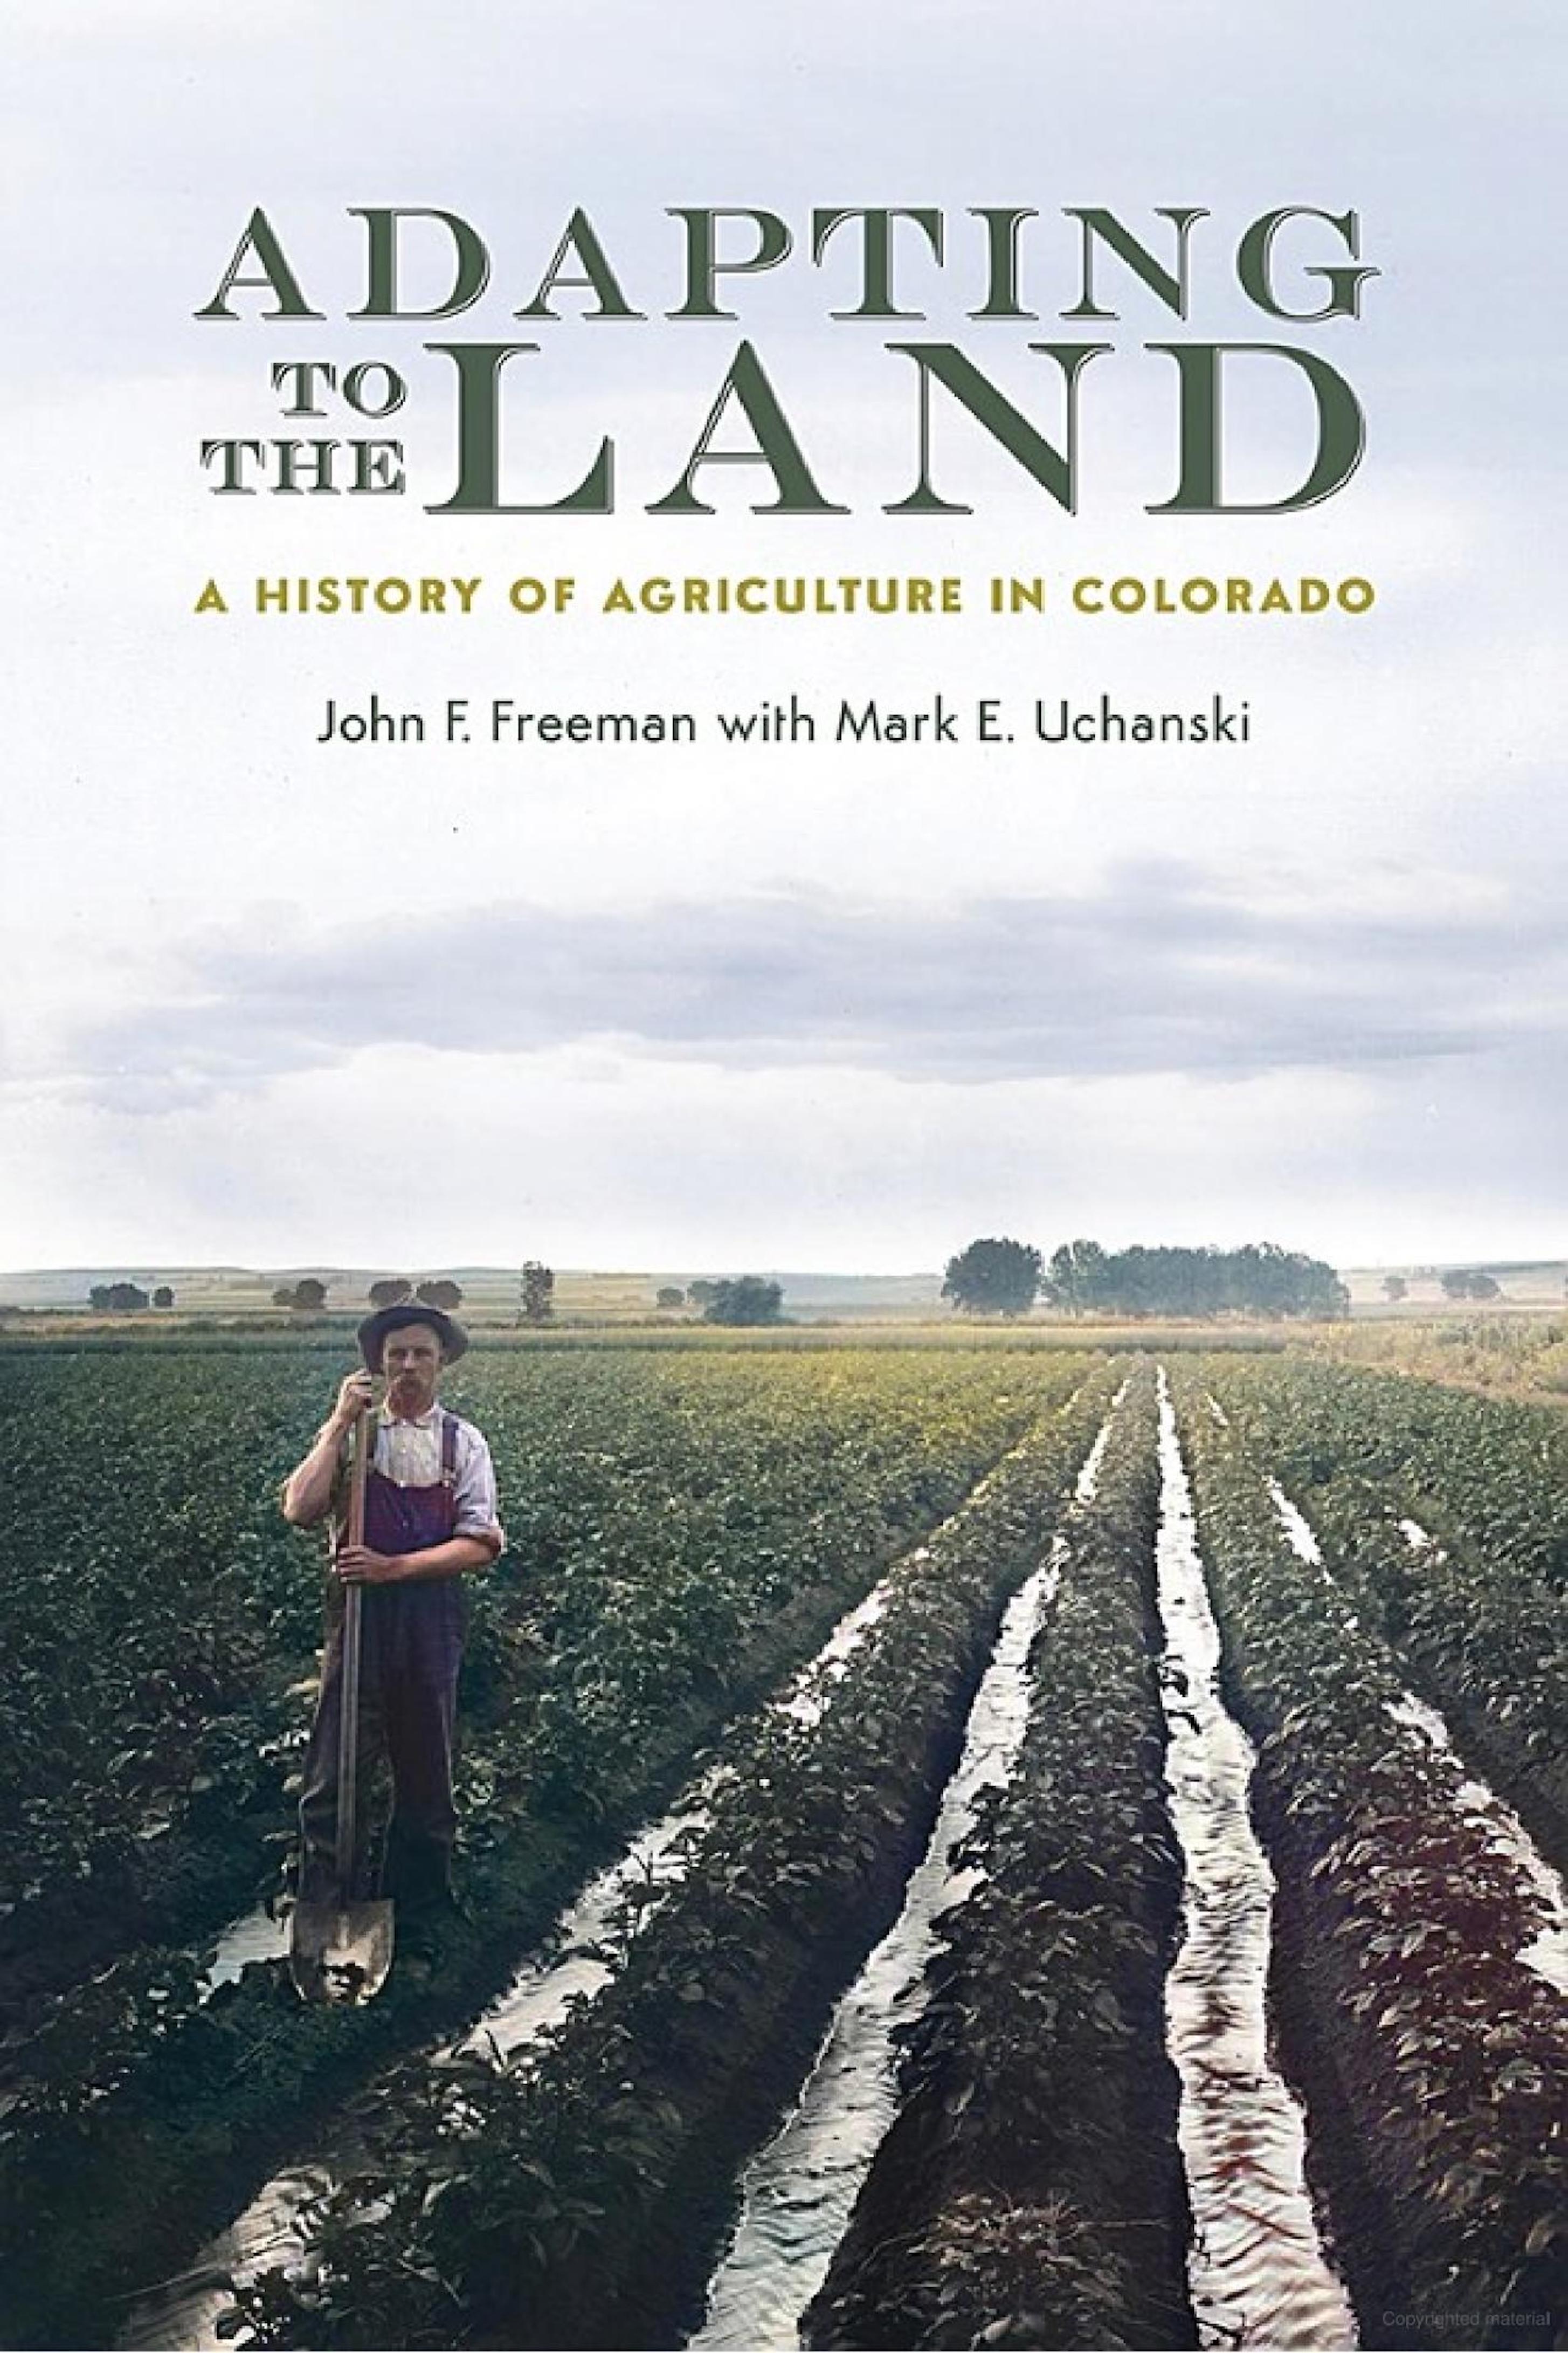 Photo of a book cover whose title is "Adapting to the Land: A History of Agriculture in Colorado." Below the title are the author' names: John F. Freeman with Mark E. Uchanski. The photo on the cover is across the cover's entirety from edge to edge, and is what appears to be an old photo, recolored, of a farmer stanging amongst rows of crops that stretch off far into the distance. Short leafy plants cover the linear mounds of early, and water flows between the mounds. The farmer is standing with a shovel.